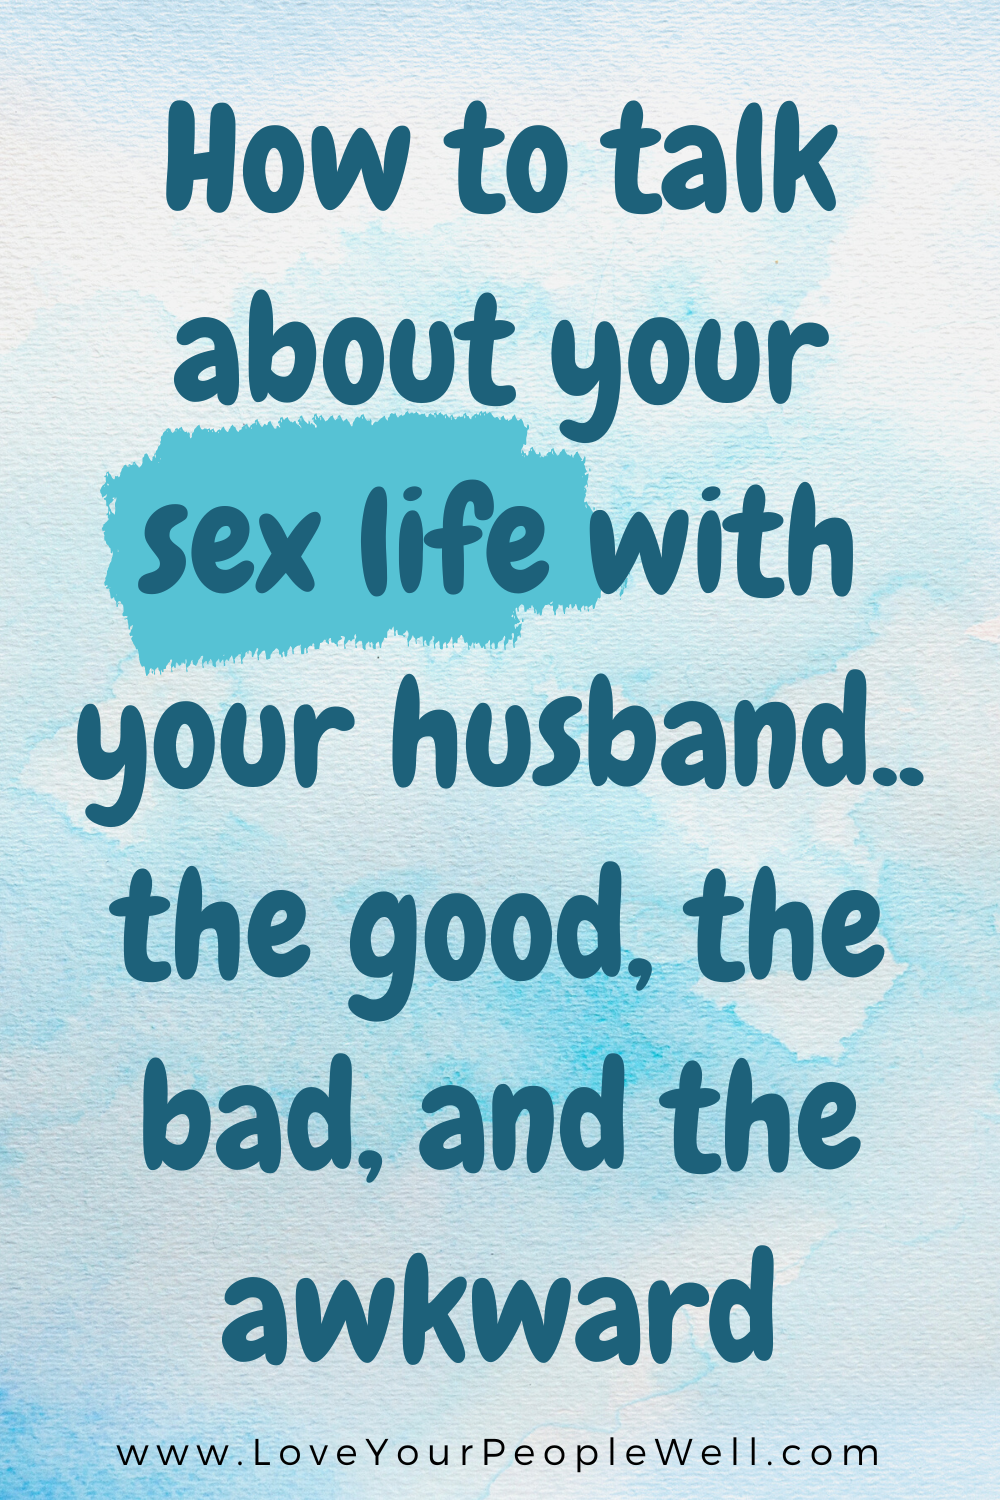 improving your married sex life